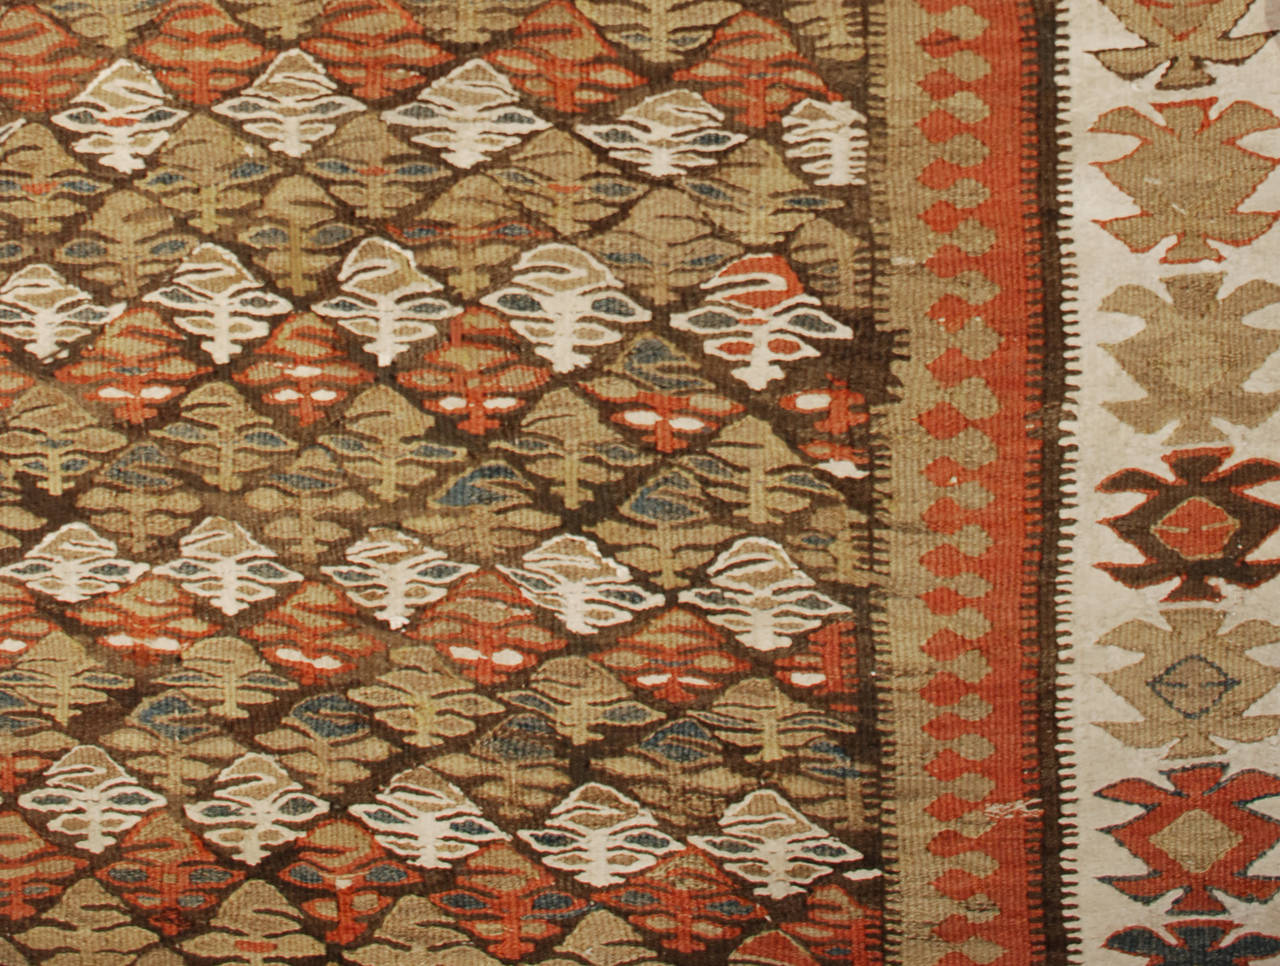 A wonderful early 20th century Persian Qazvin Kilim runner with an intricately woven multicolored floral pattern on a brown ground, surrounded by a complementary geometric border.